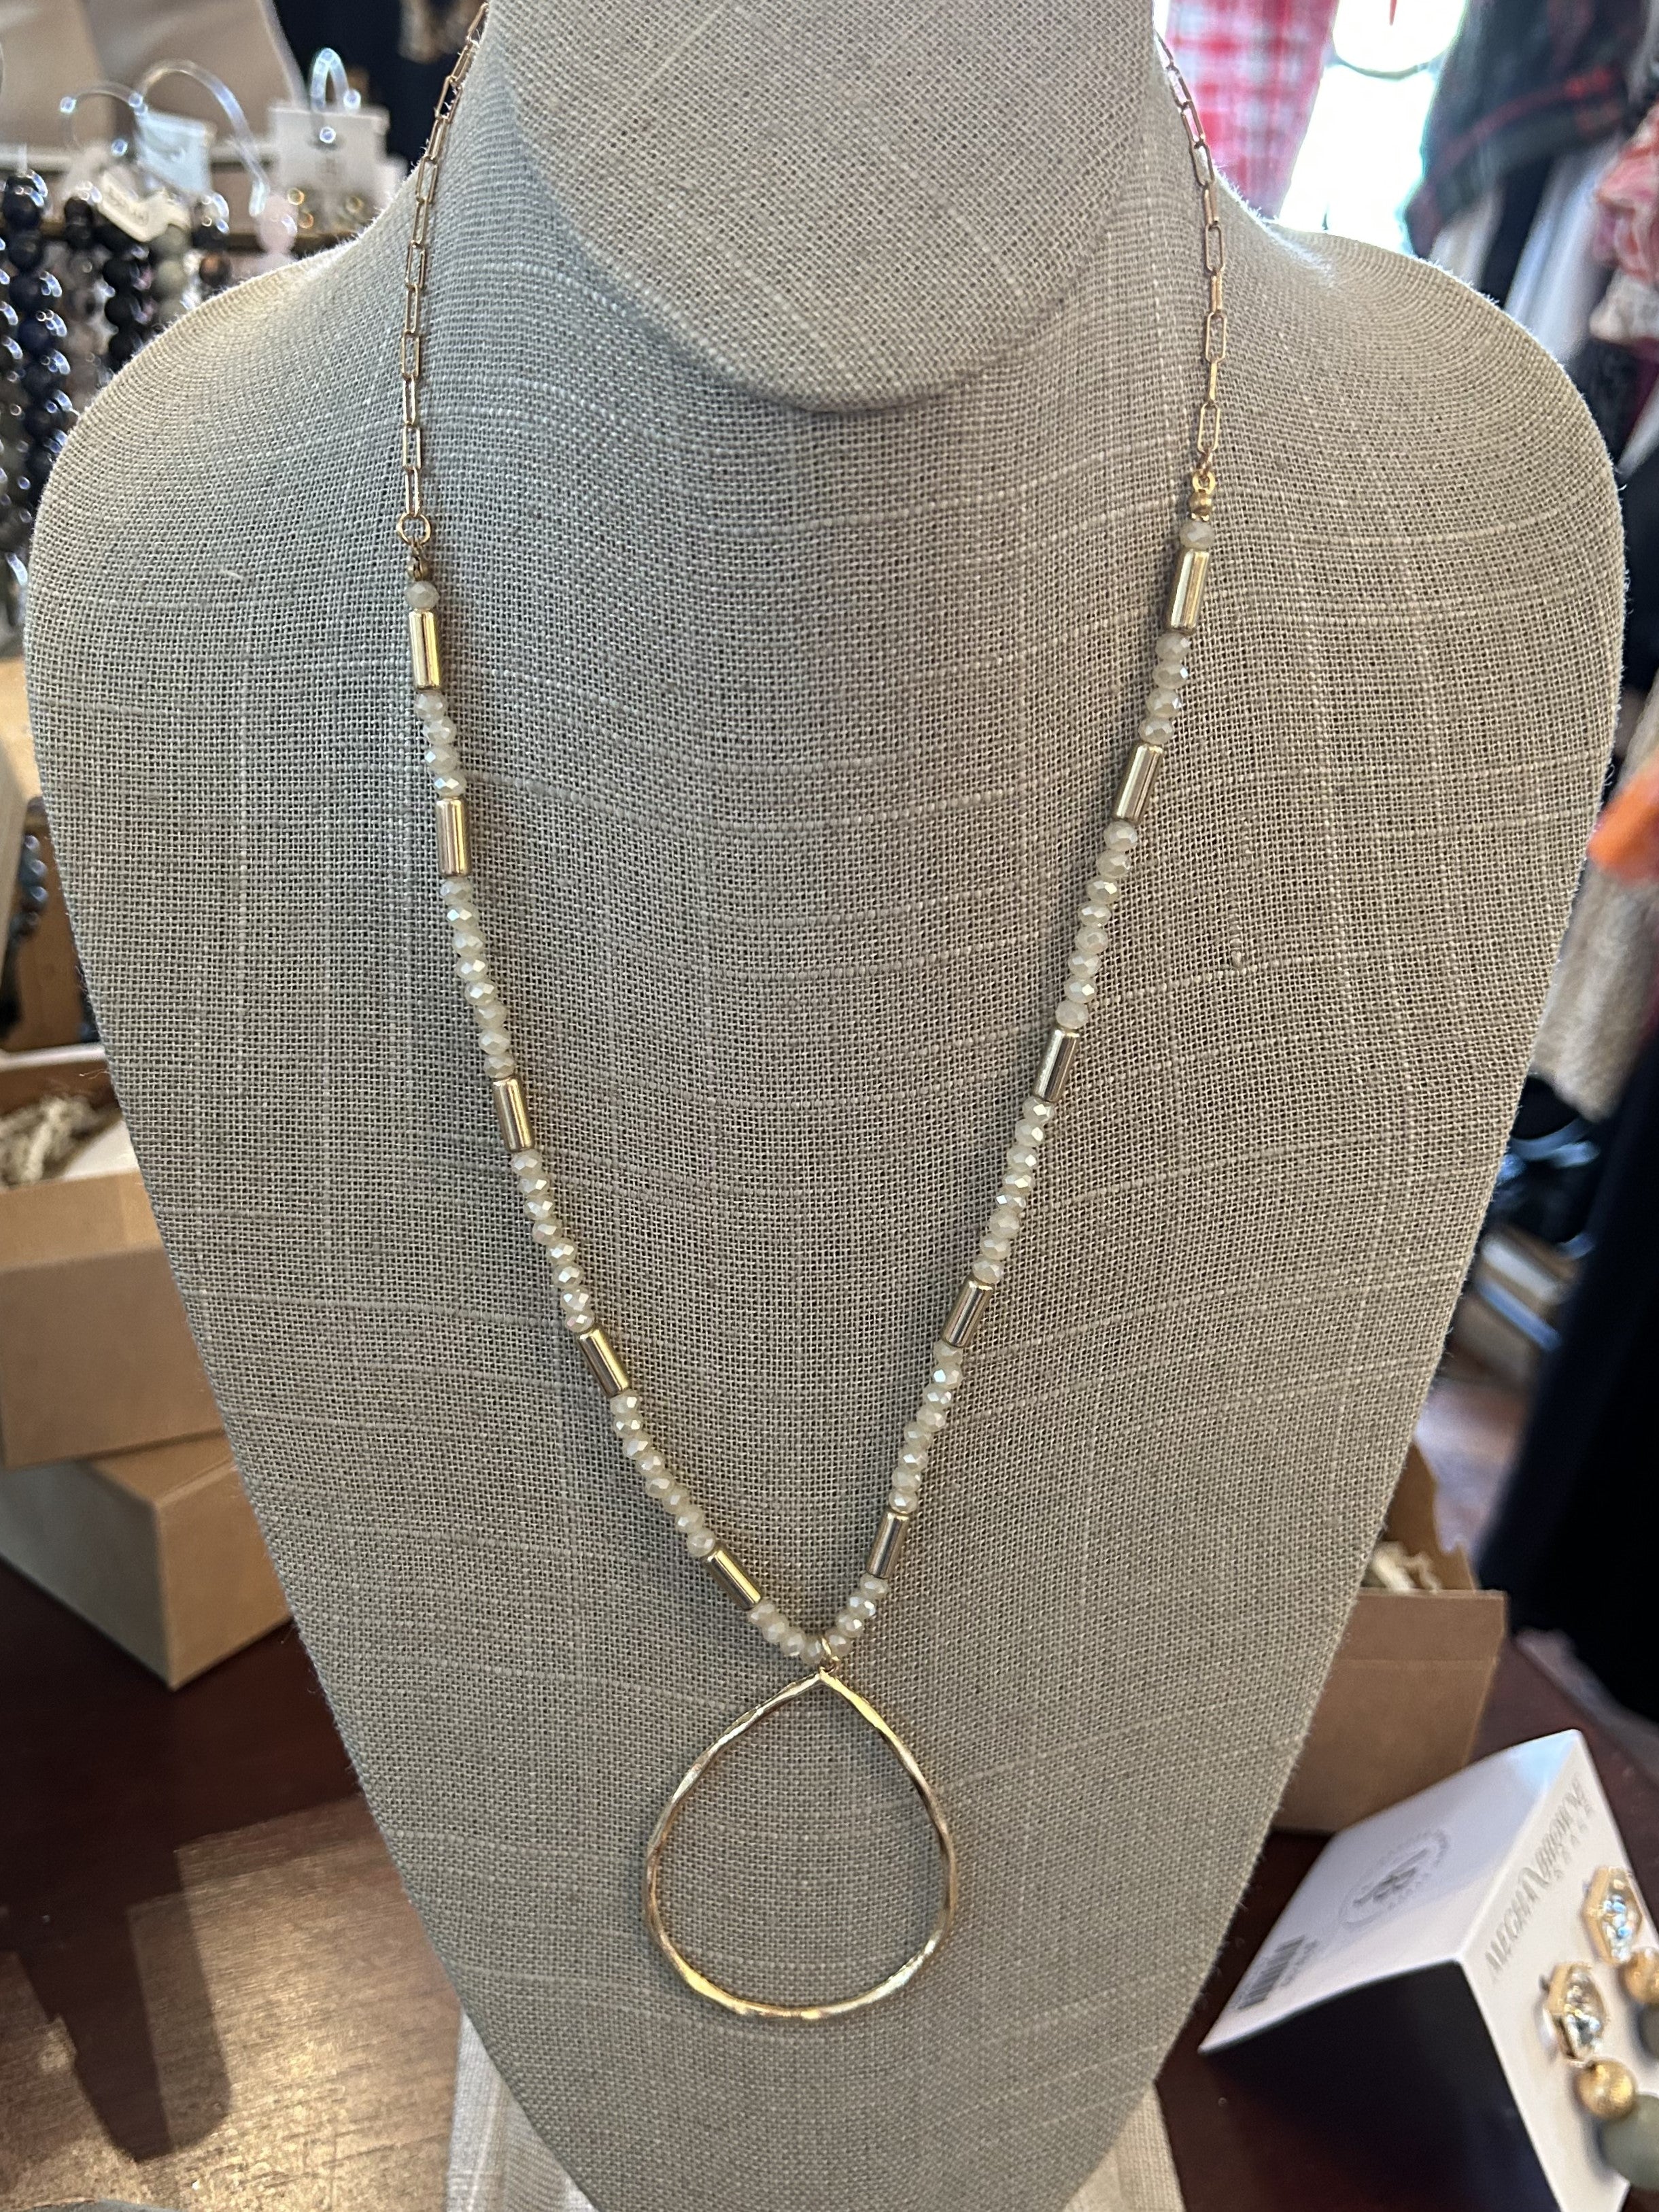 This Long Gold & Crystal Necklace w/ Teardrop Pendant is such a lovely necklace! Its delicate gold and crystal links create a stunning visual, while the teardrop pendant adds a special touch of elegance. The long necklace is an exquisite combination of beauty and style.   Approximate Length: 32-3